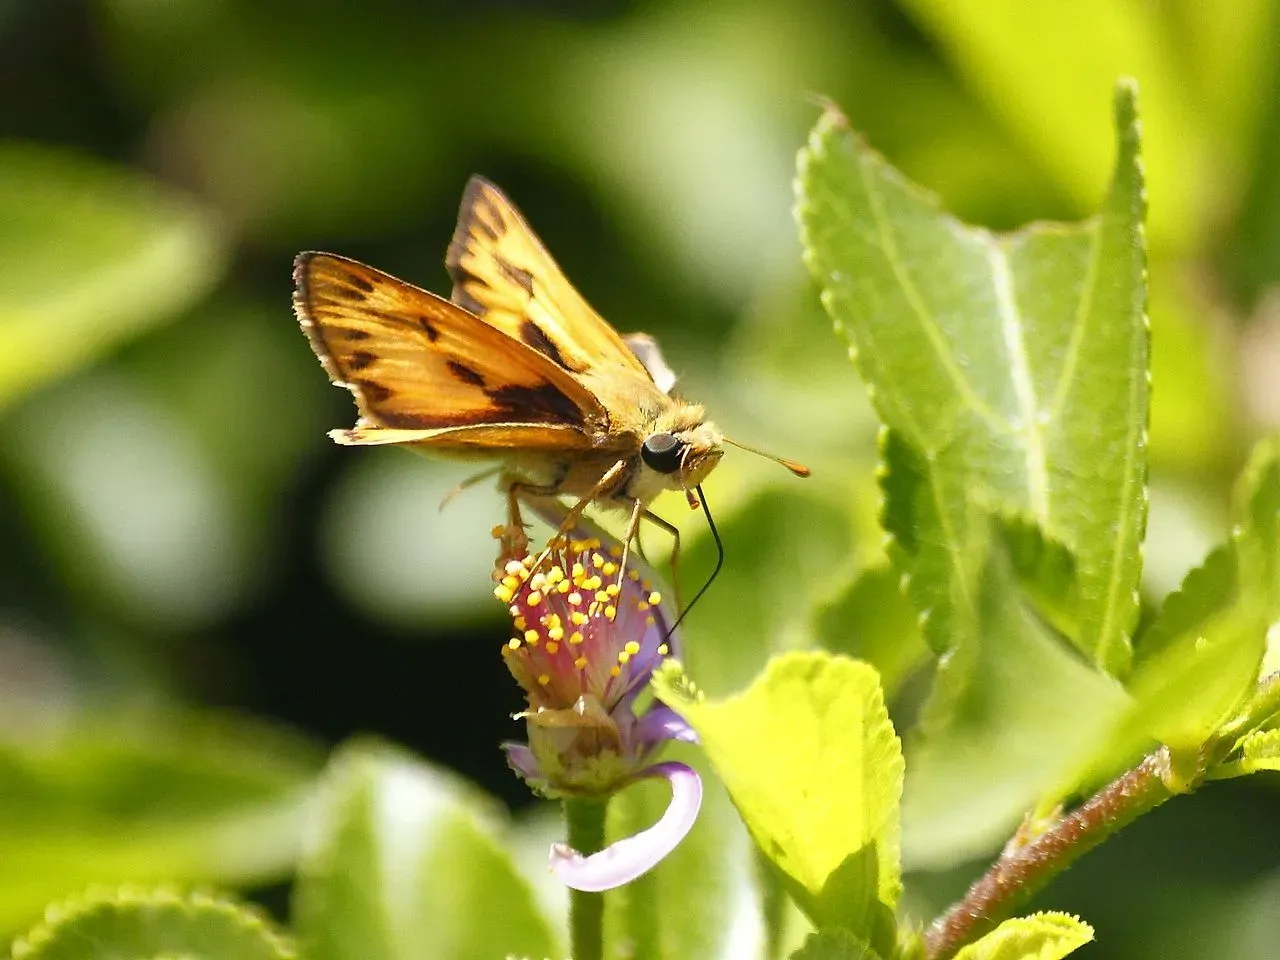 Read these fun facts about the Fiery skipper (Hylephila phyleus) in your garden.